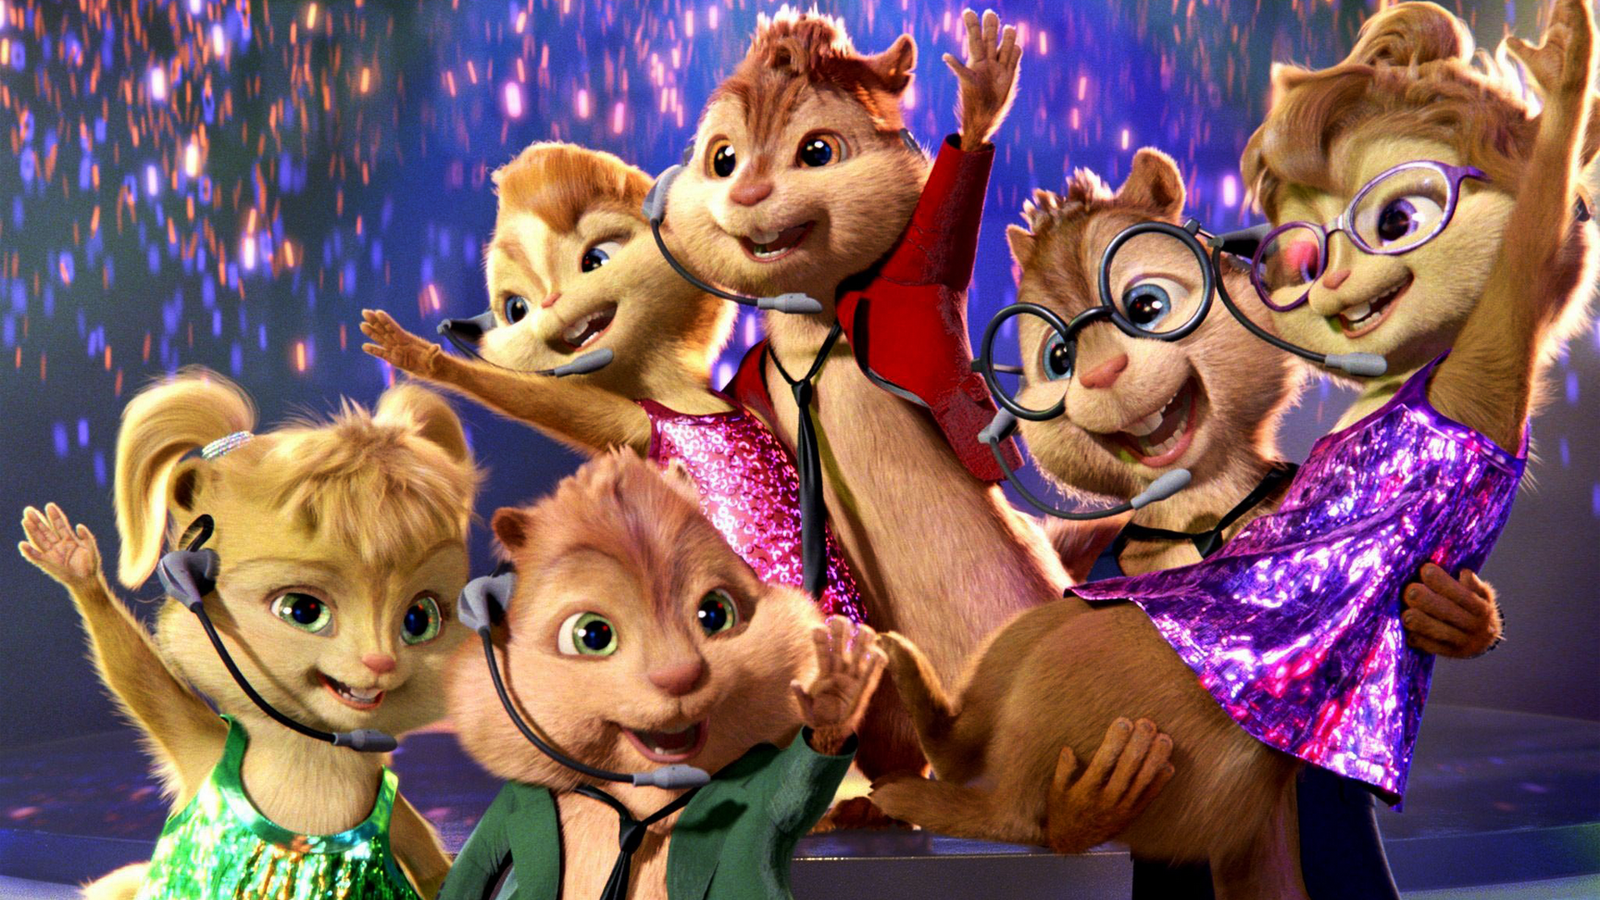  Wallpaper Alvin and the Chipmunks Chipwrecked Movie Wallpapers